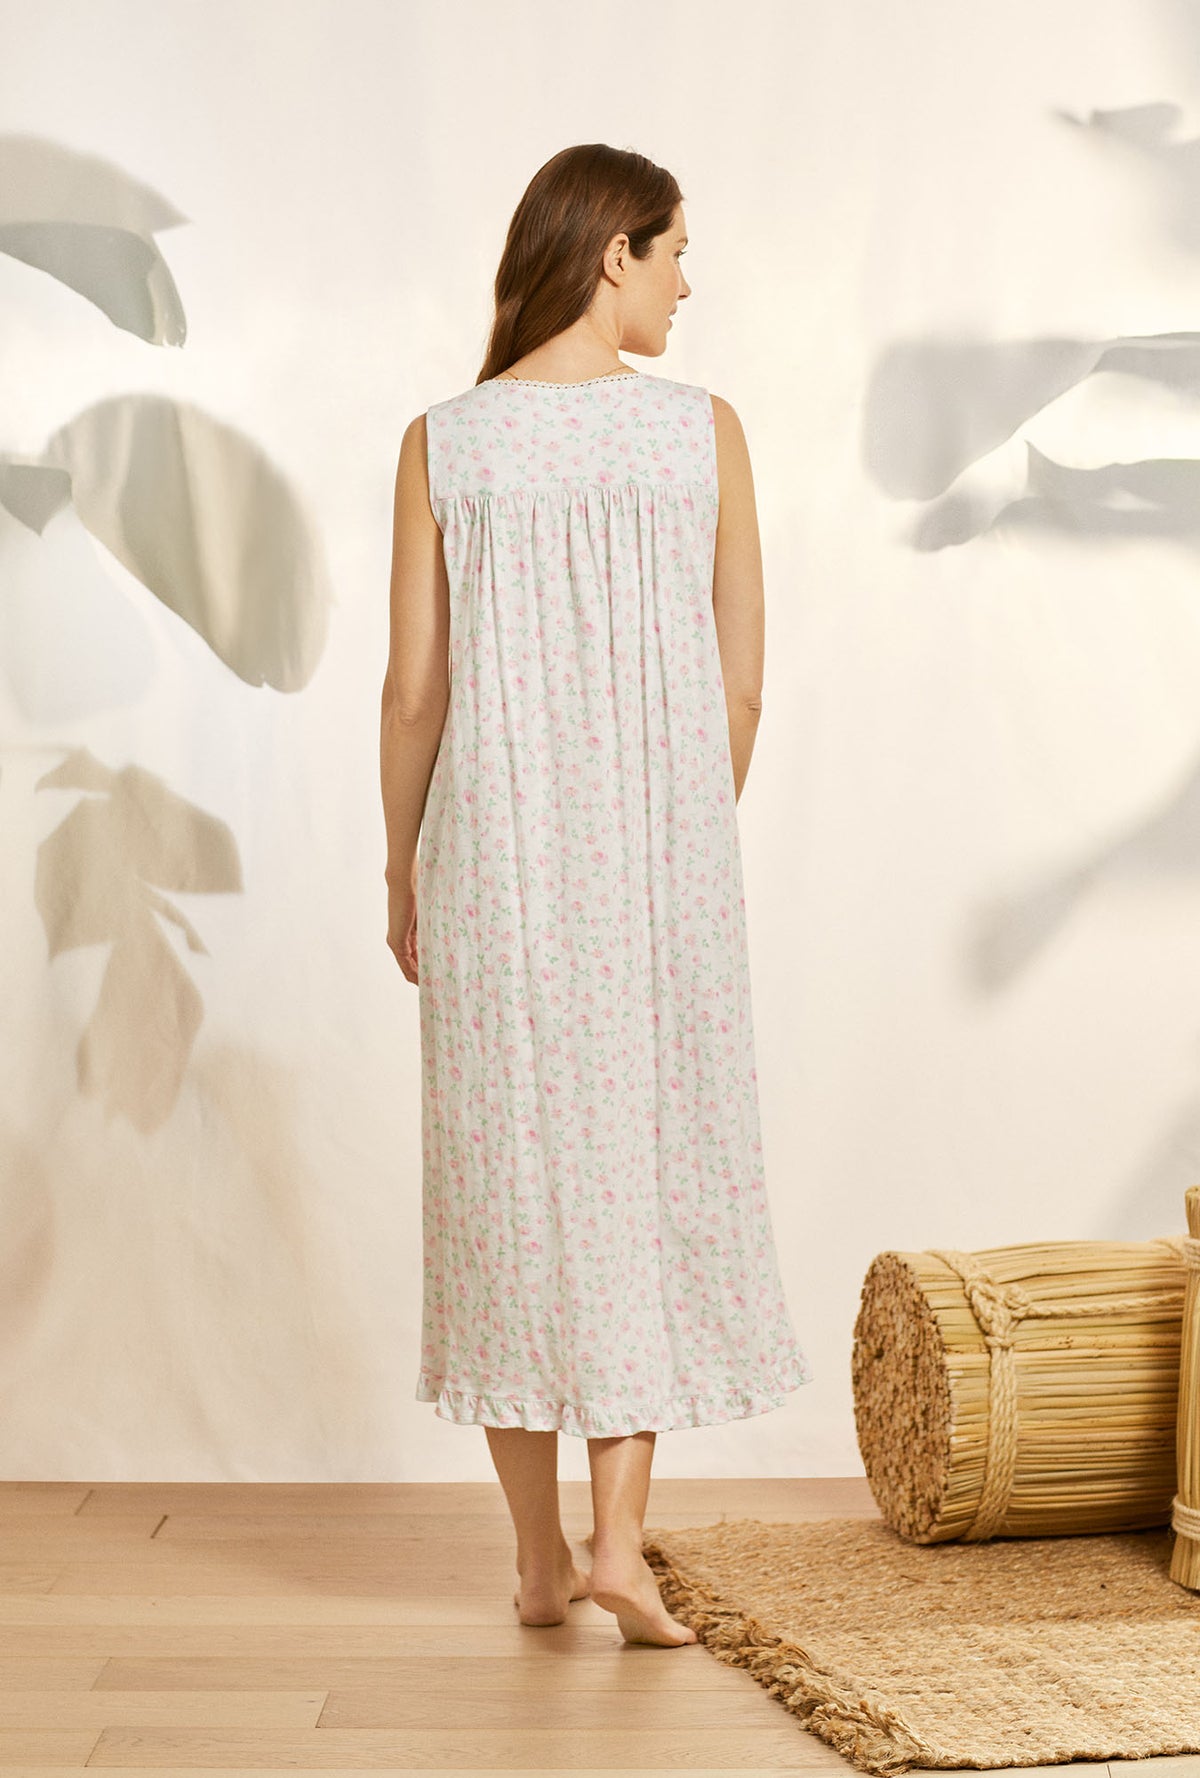 A lady wearing white sleeveless cotton knit long nightgown with petal dreams.